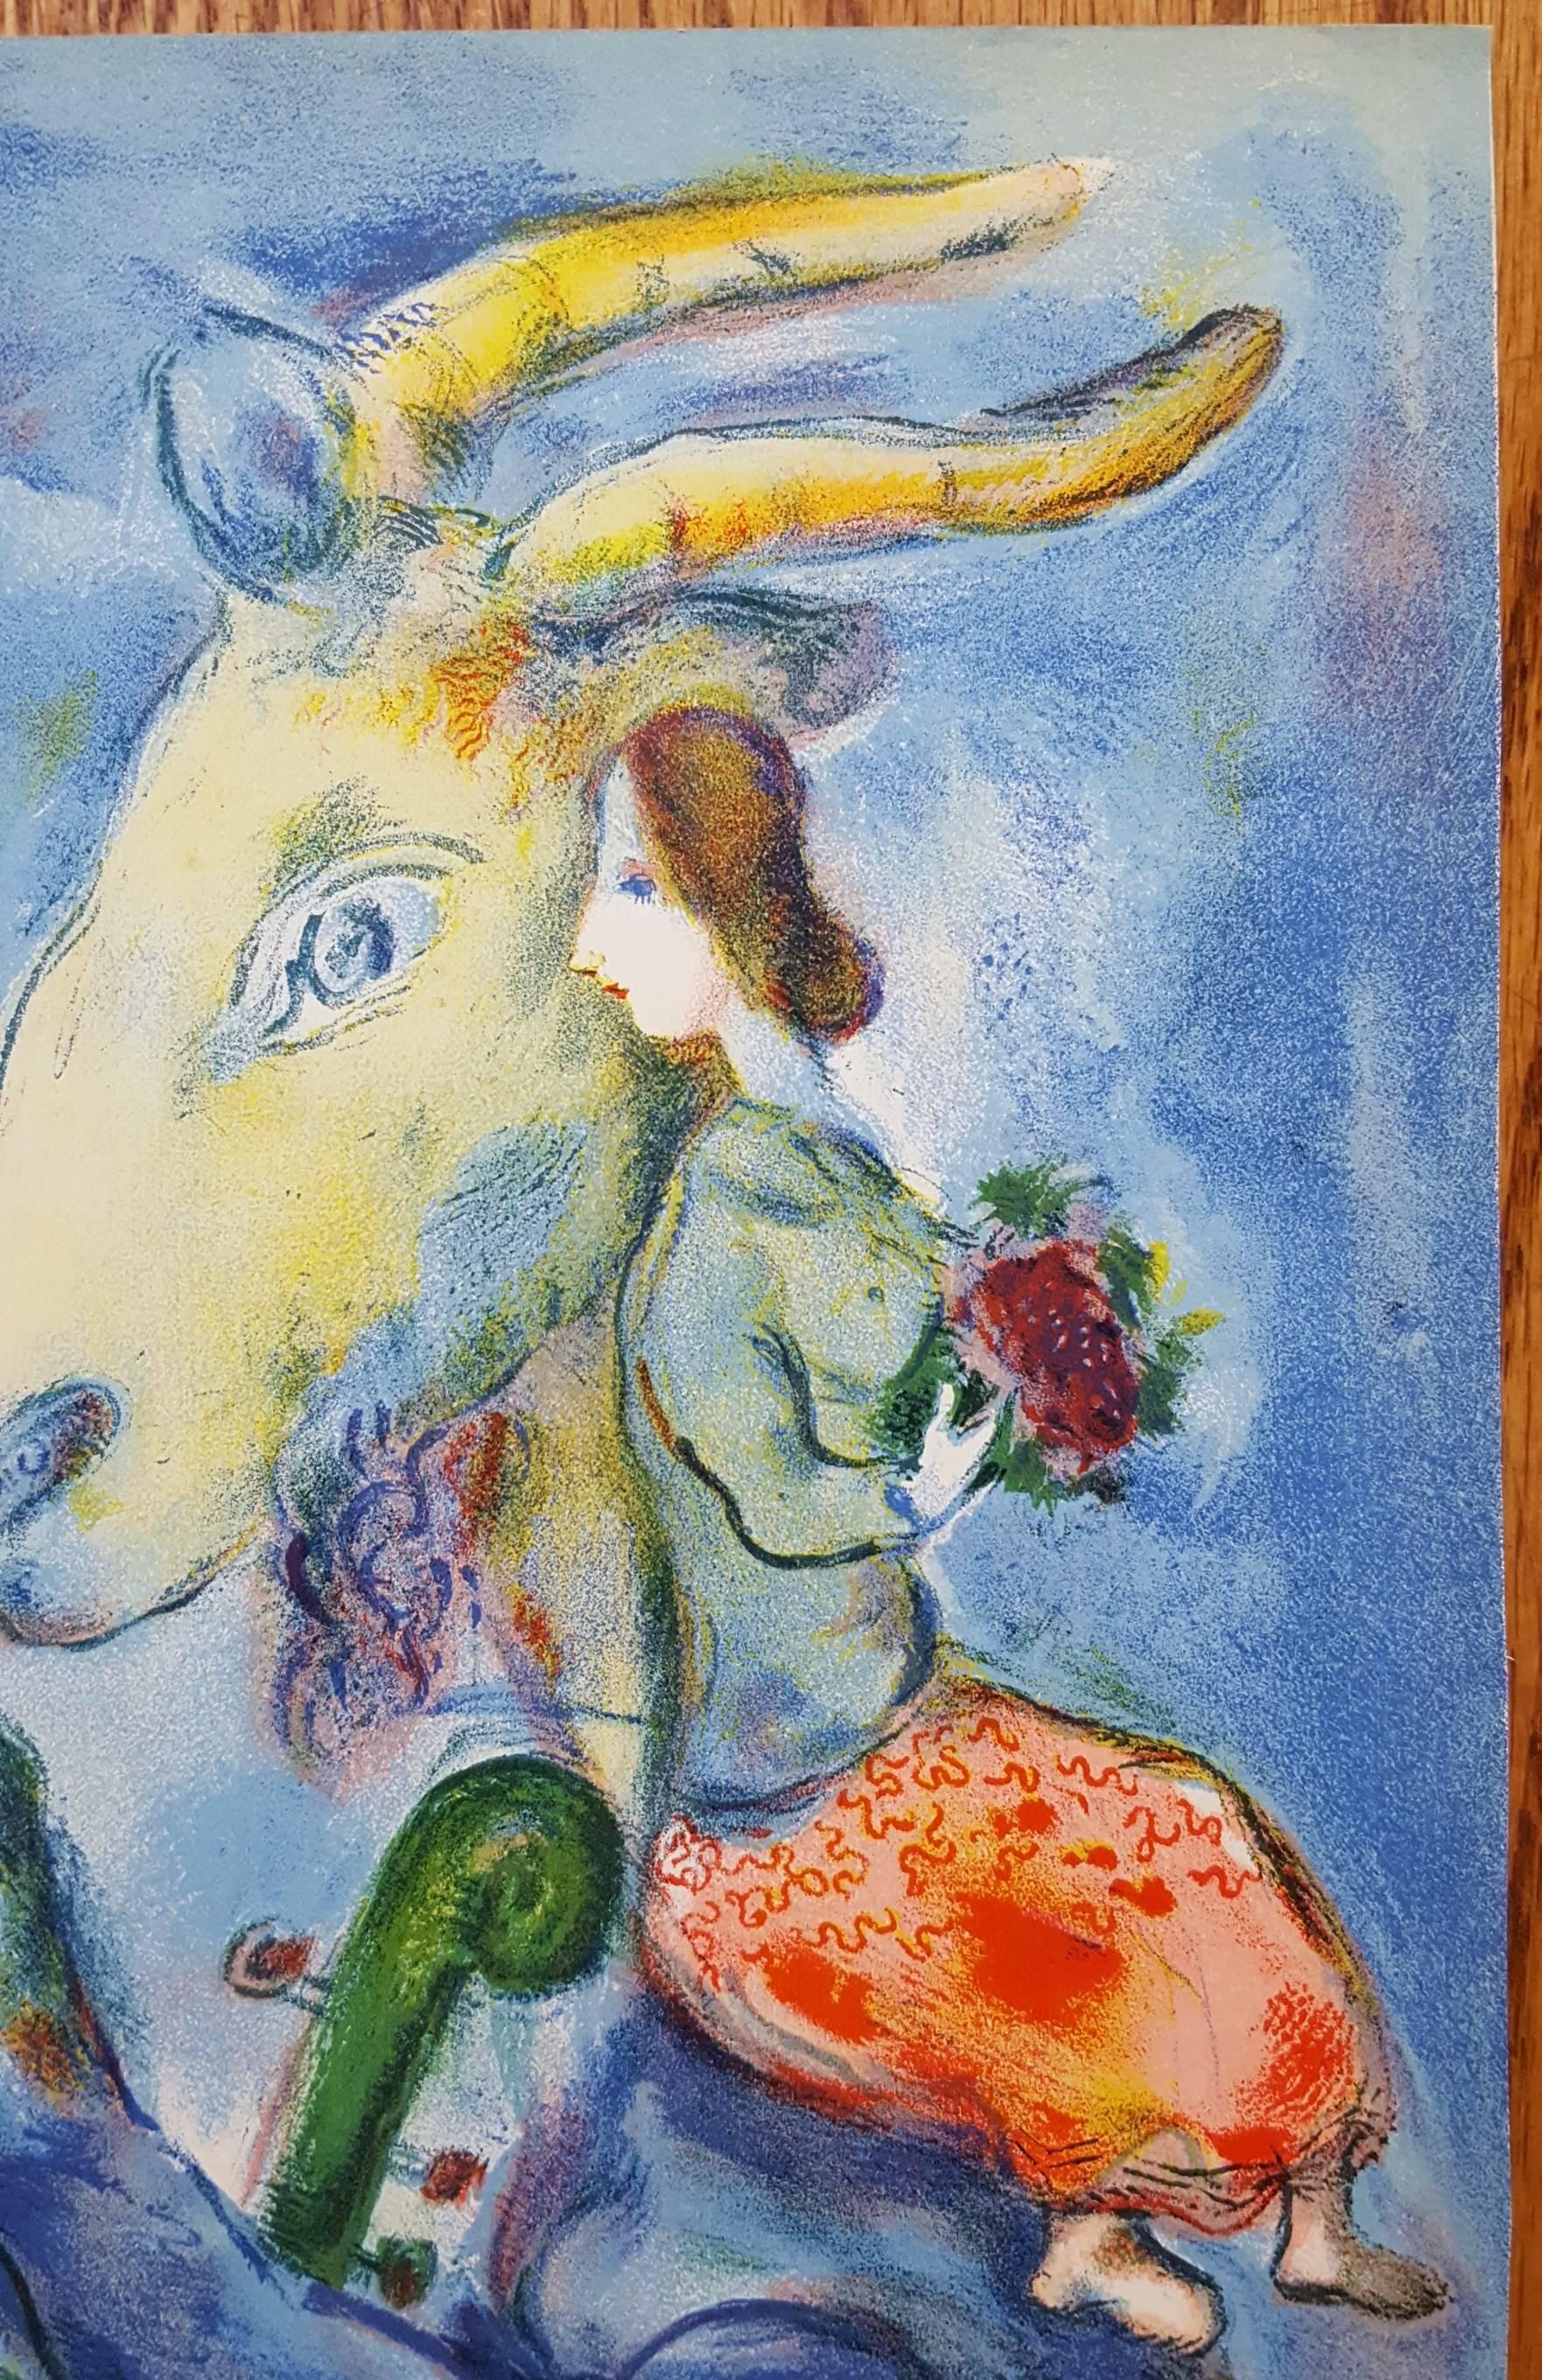 An original lithograph on wove paper after Russian-French artist Marc Chagall (1887-1985) titled 